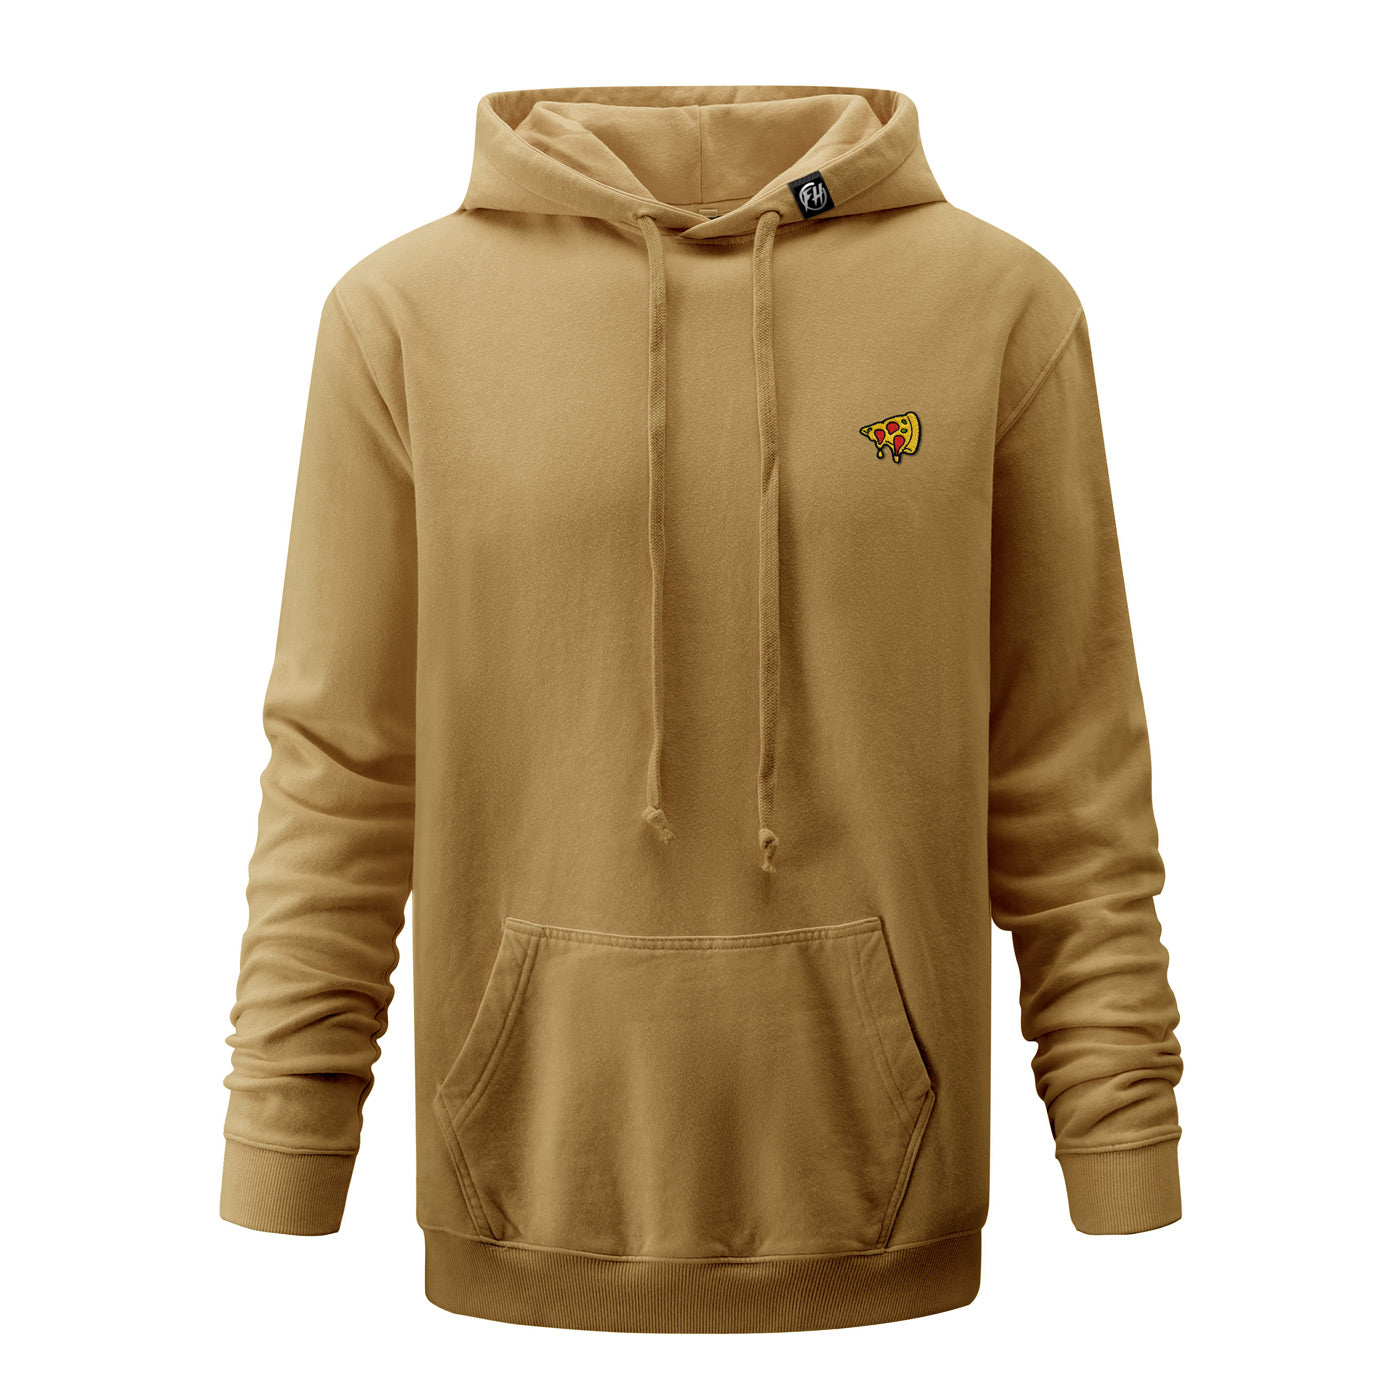 One Slice Embroidered Hoodie